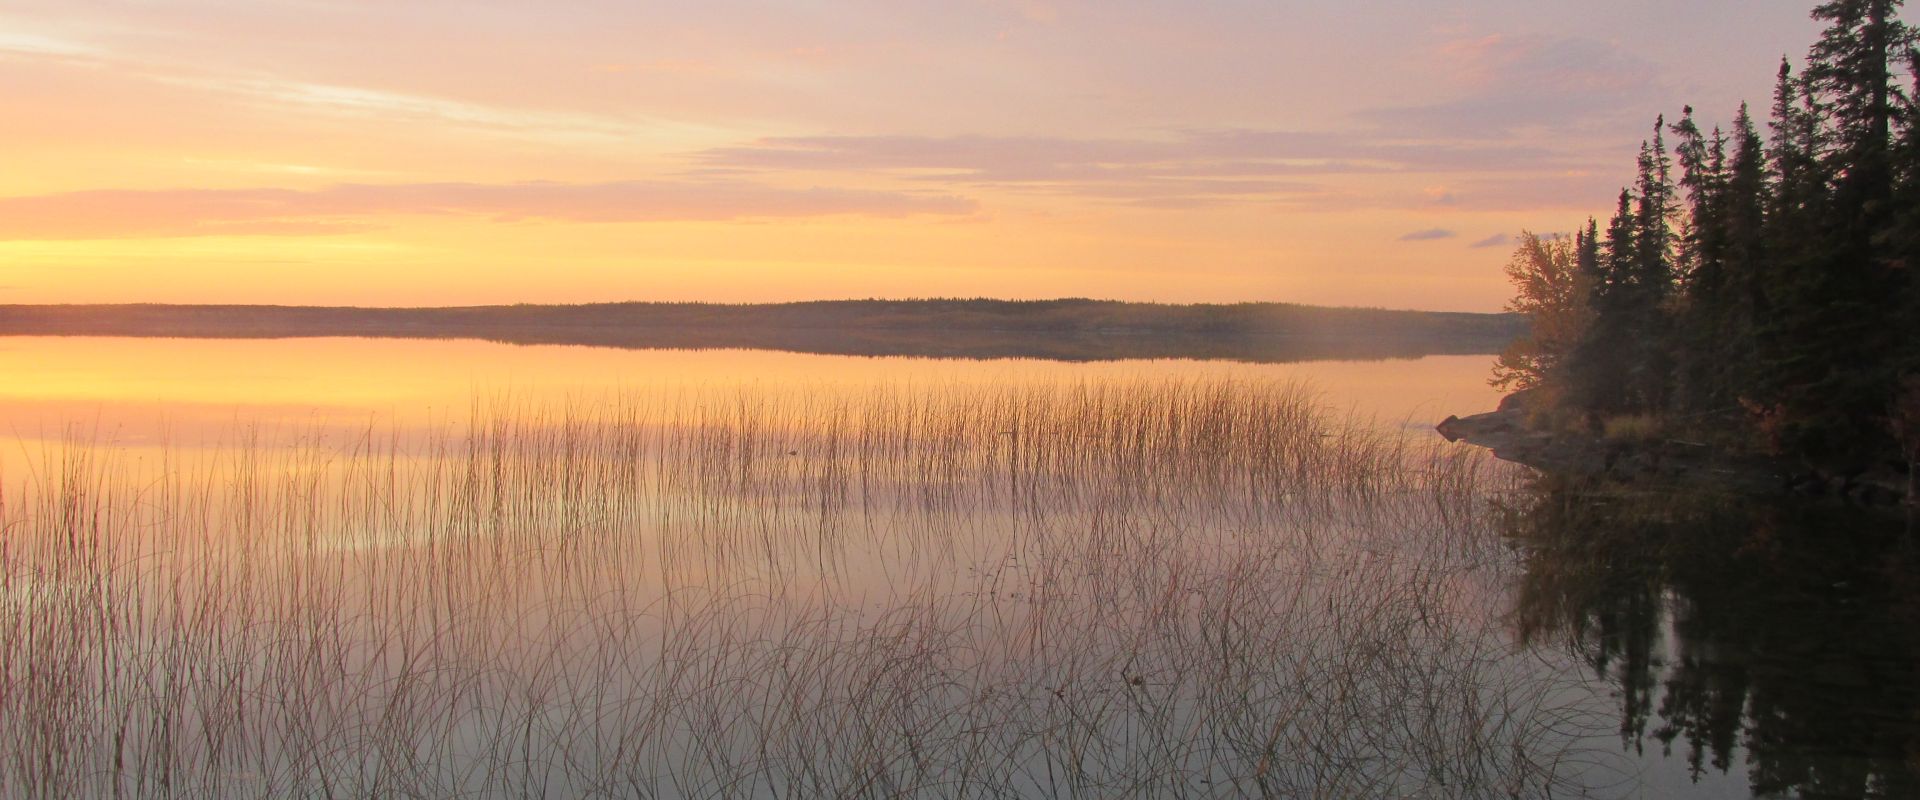 A calm, glassy lake is pictured at sunset. Many reeds are visible in the water near the shoreline.